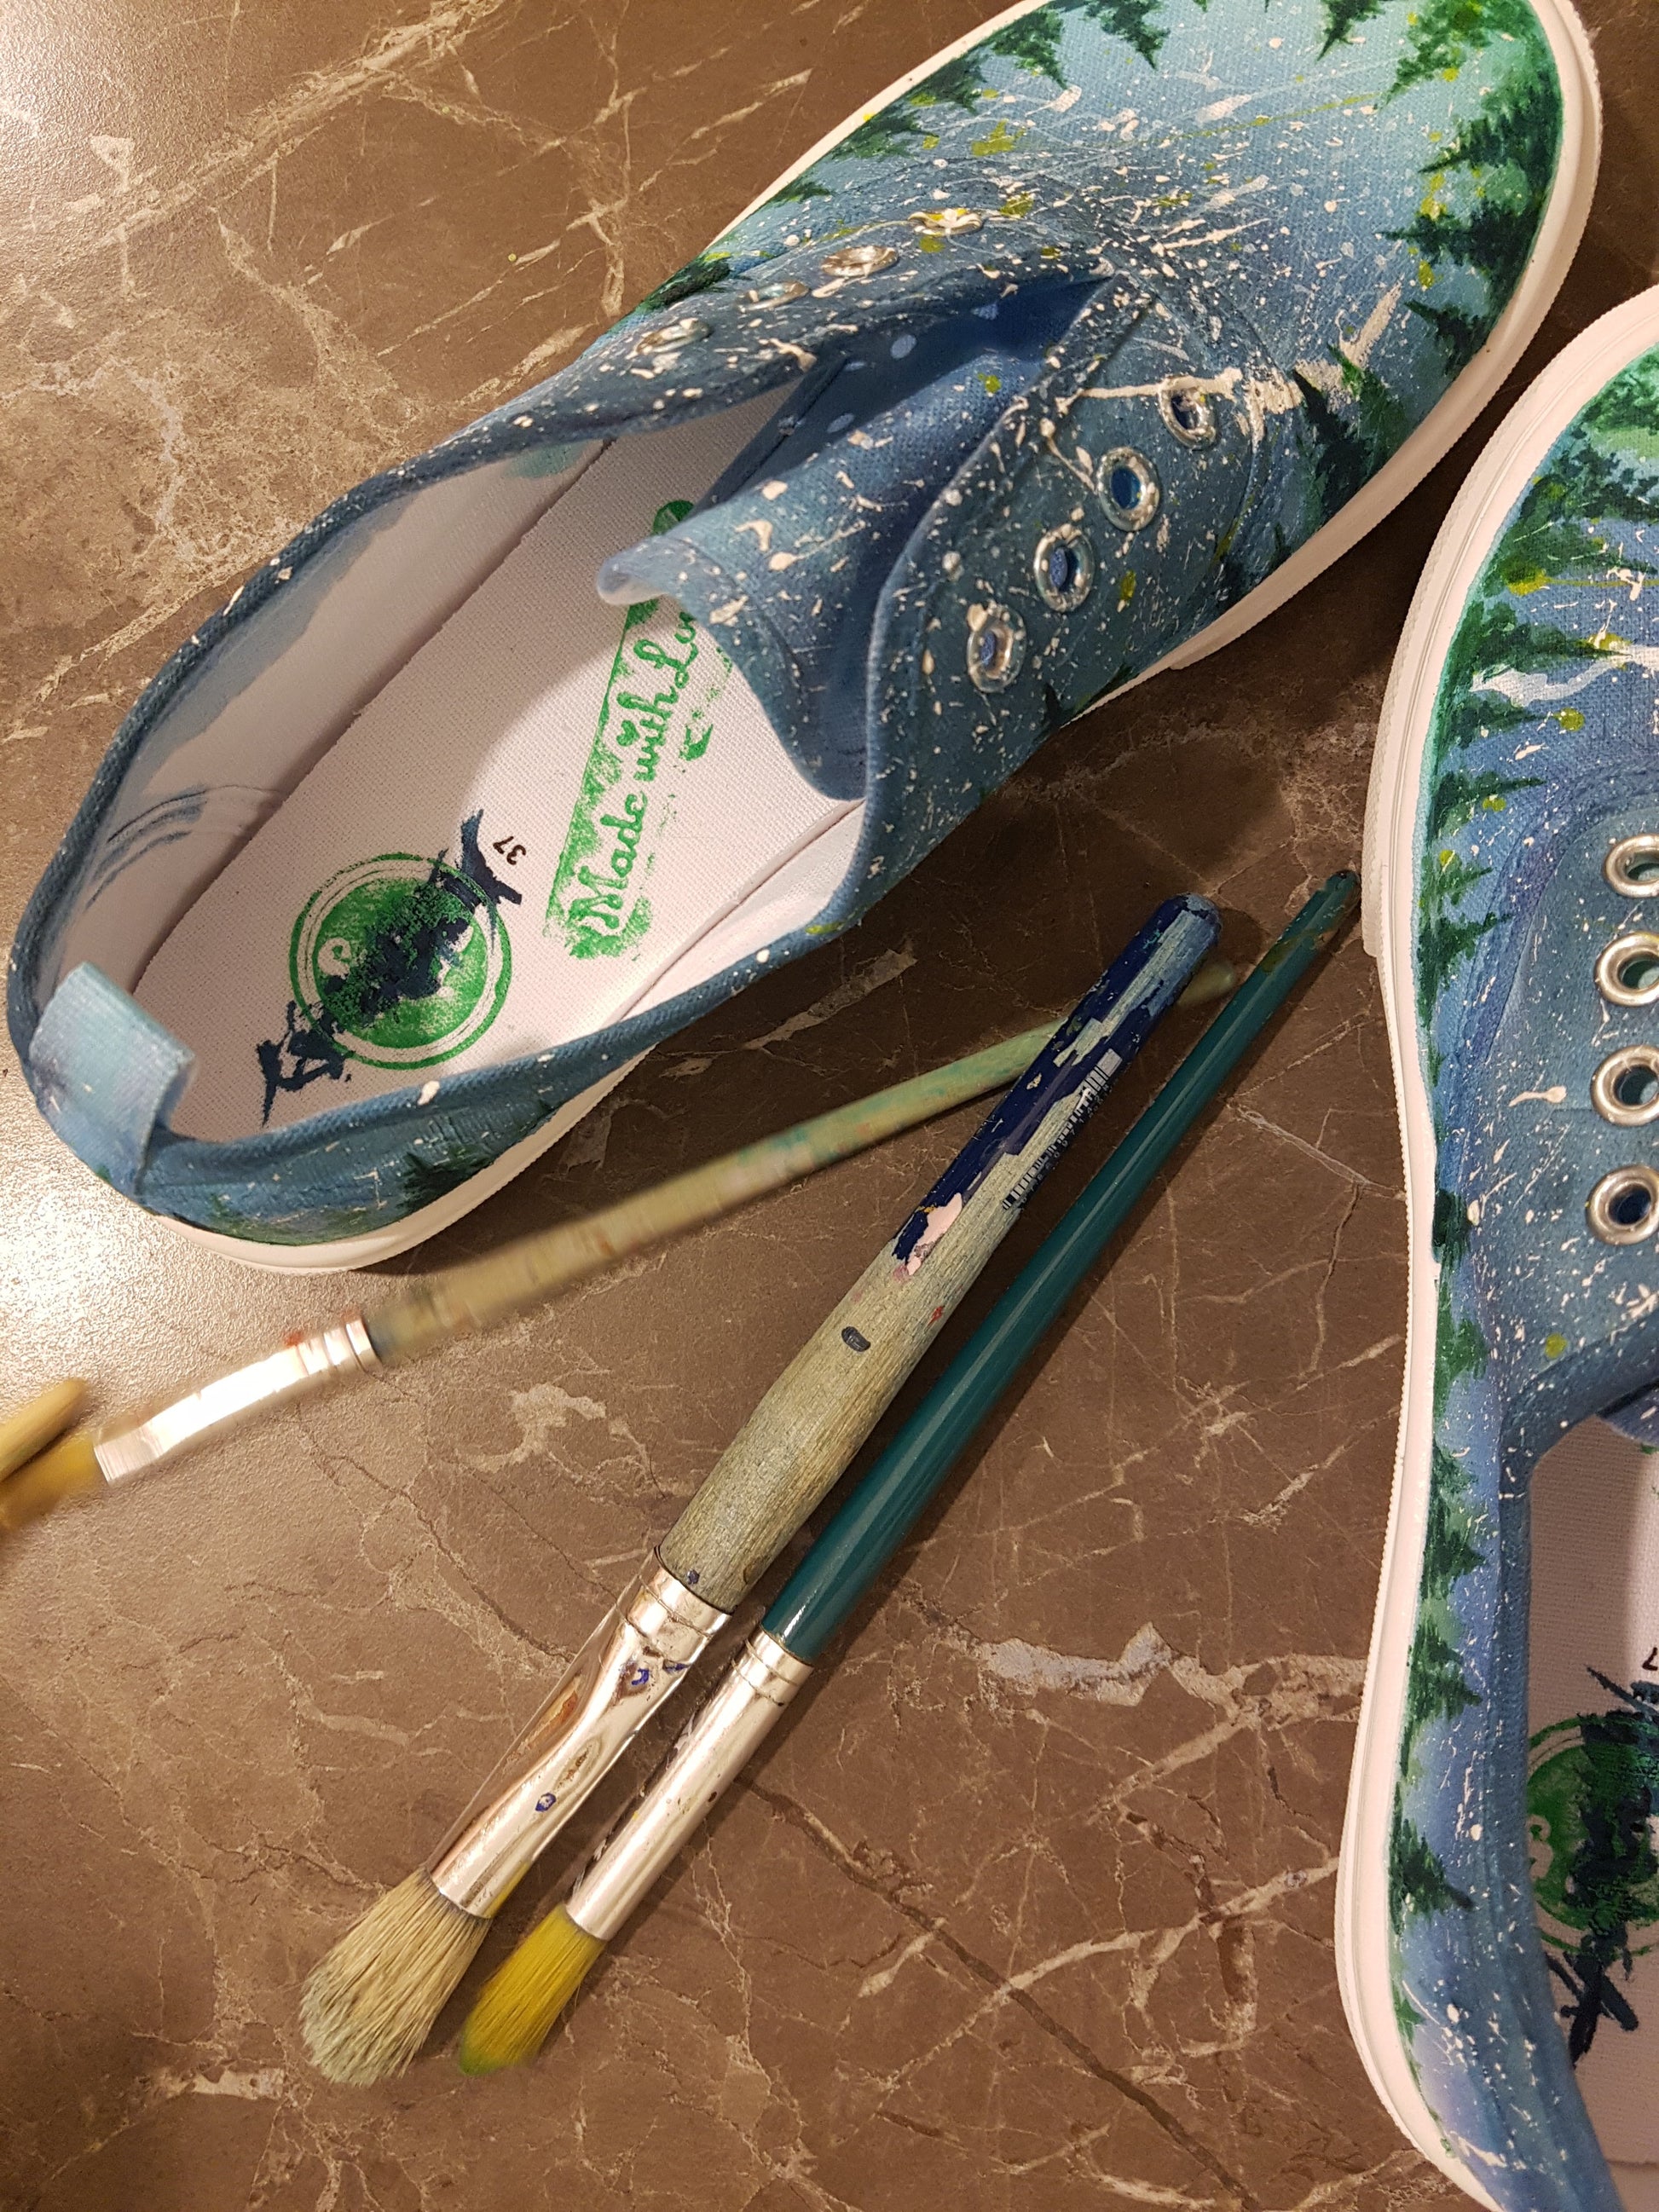 Tenisi Pictati, Painted Sneakers, Pictura Manuala Tenisi, handmade shoes, Everyday shoes, Woman Fashion, customized shoes, Trees, Aurora Trees, Aurora, Aurora Sneakers